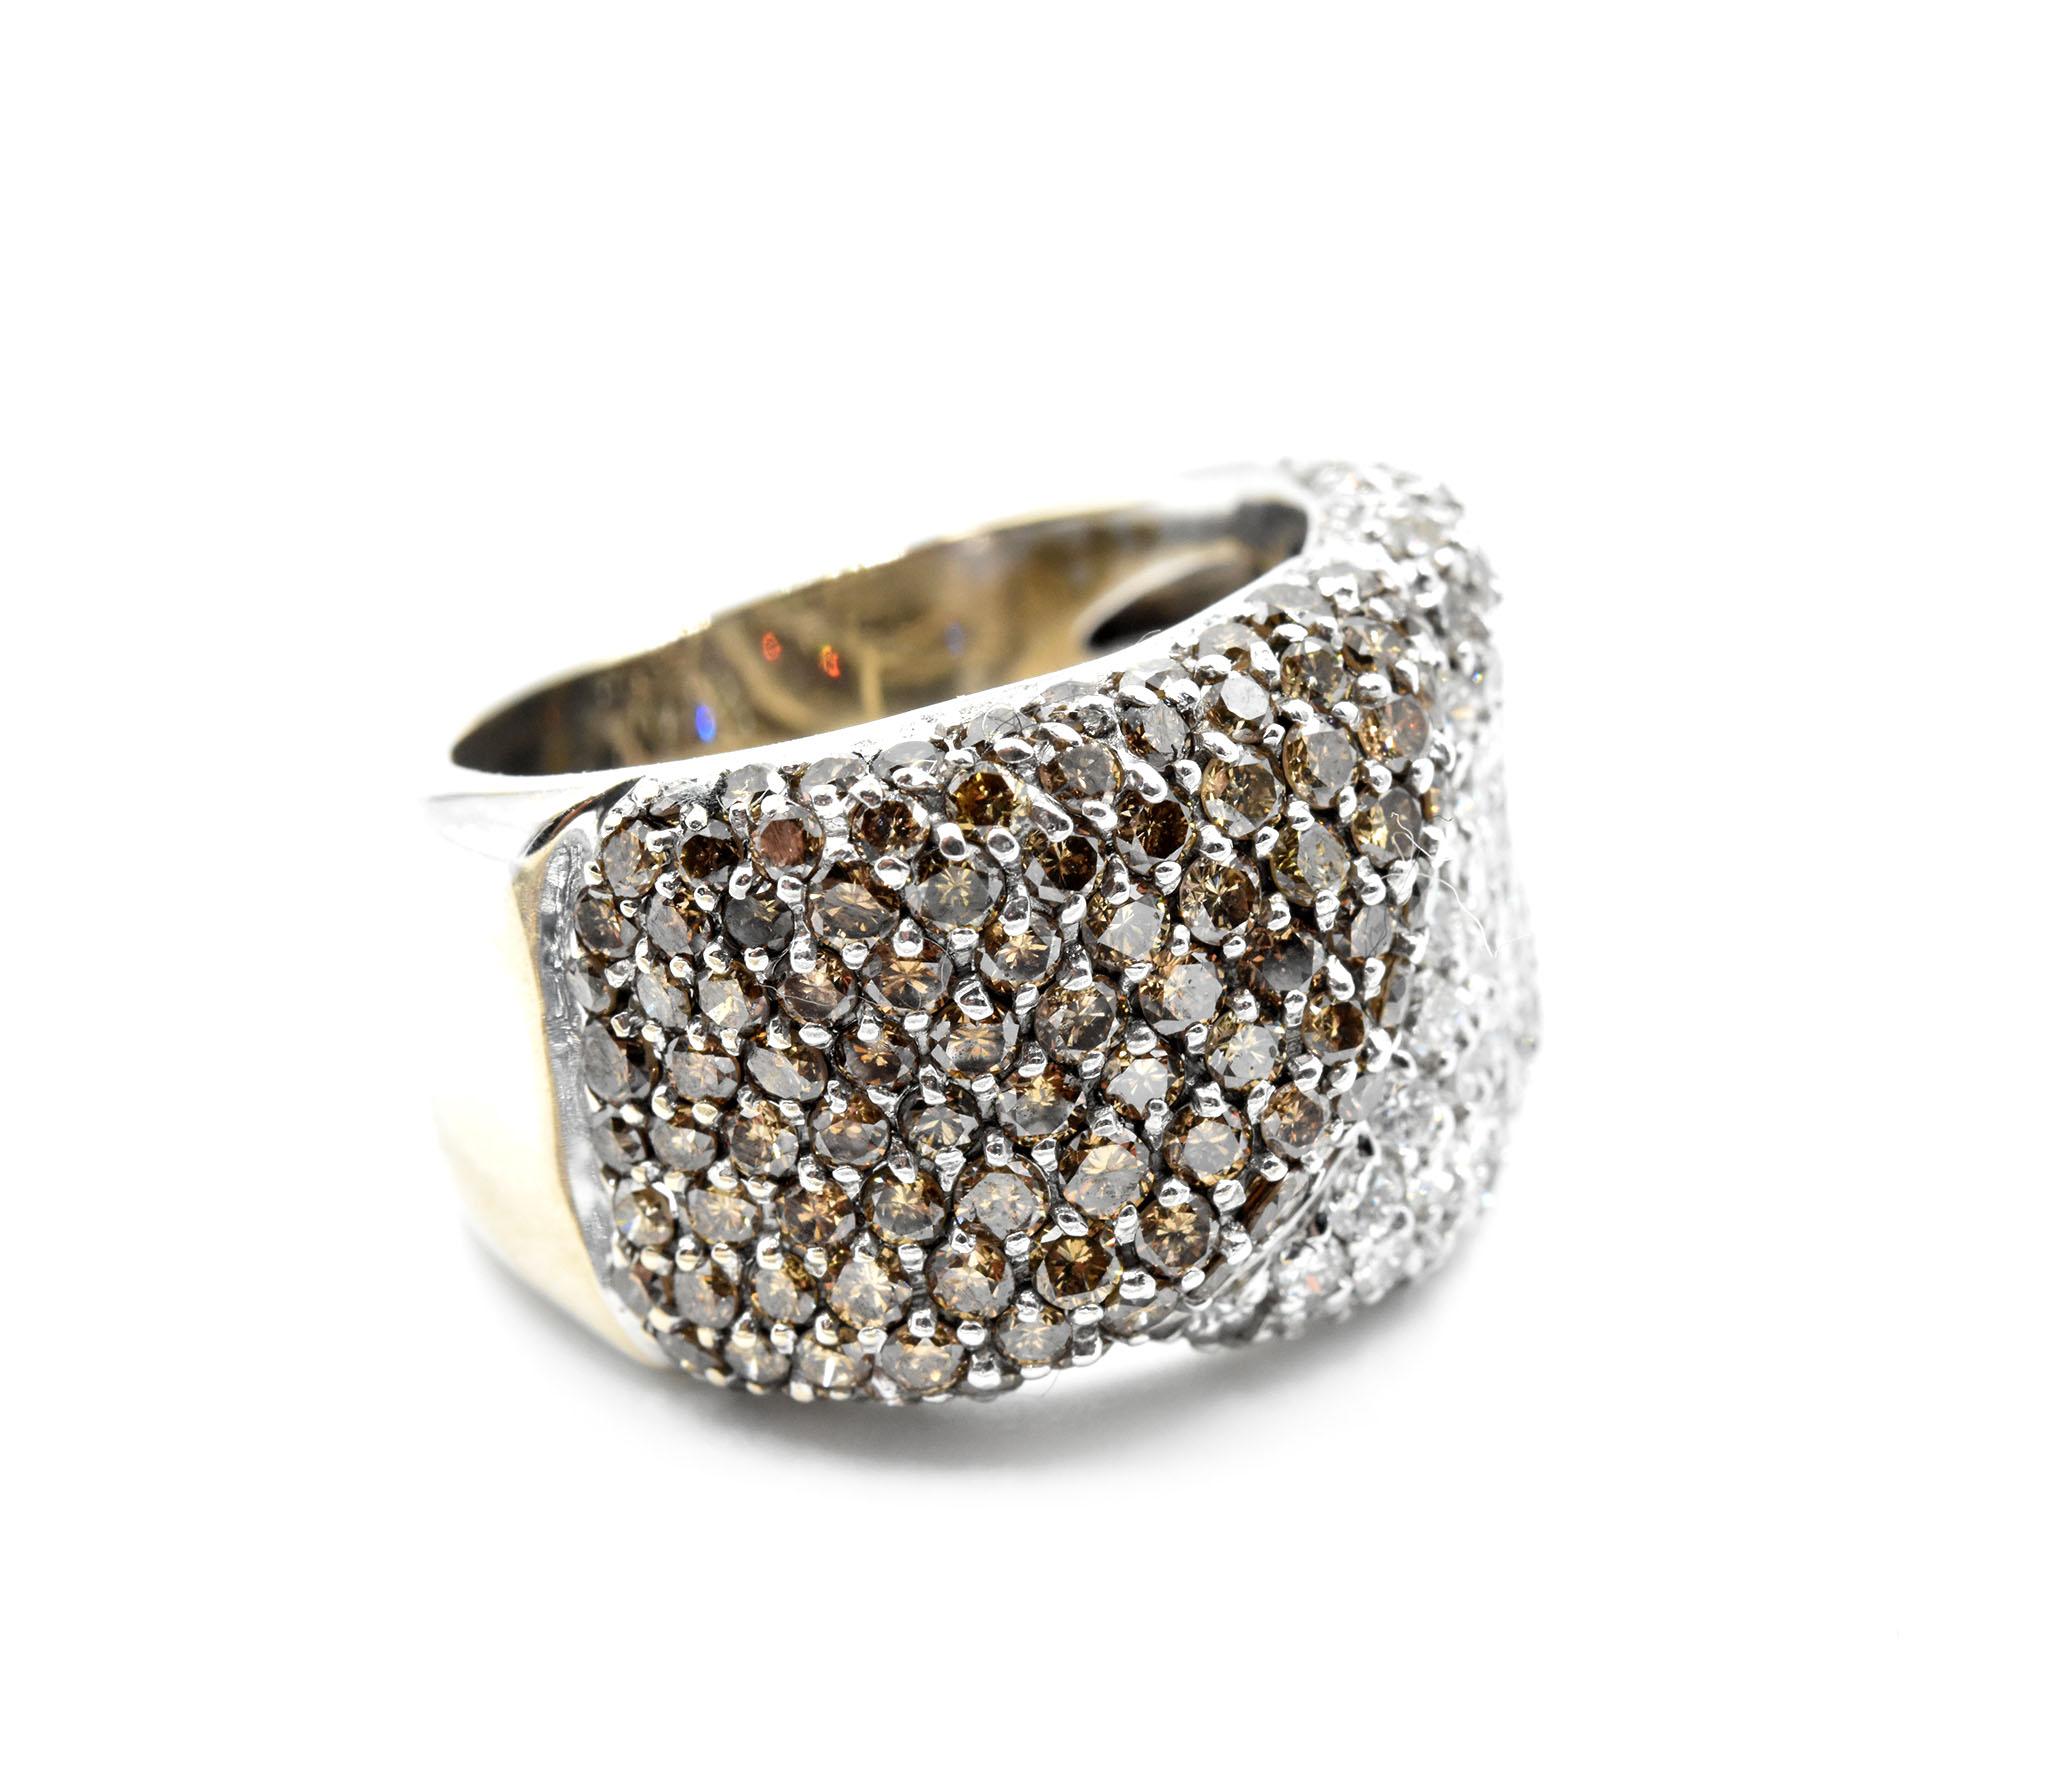 Designer: custom design
Material: 14k white gold
White Diamonds: 90 round brilliant cuts = 1.80 carats
Chocolate Diamonds: 90 round brilliant cuts = 1.80 carats
Total Carat Weight: 3.60 carat total weight
Dimensions: ring top is a 1/2-inch wide
Ring